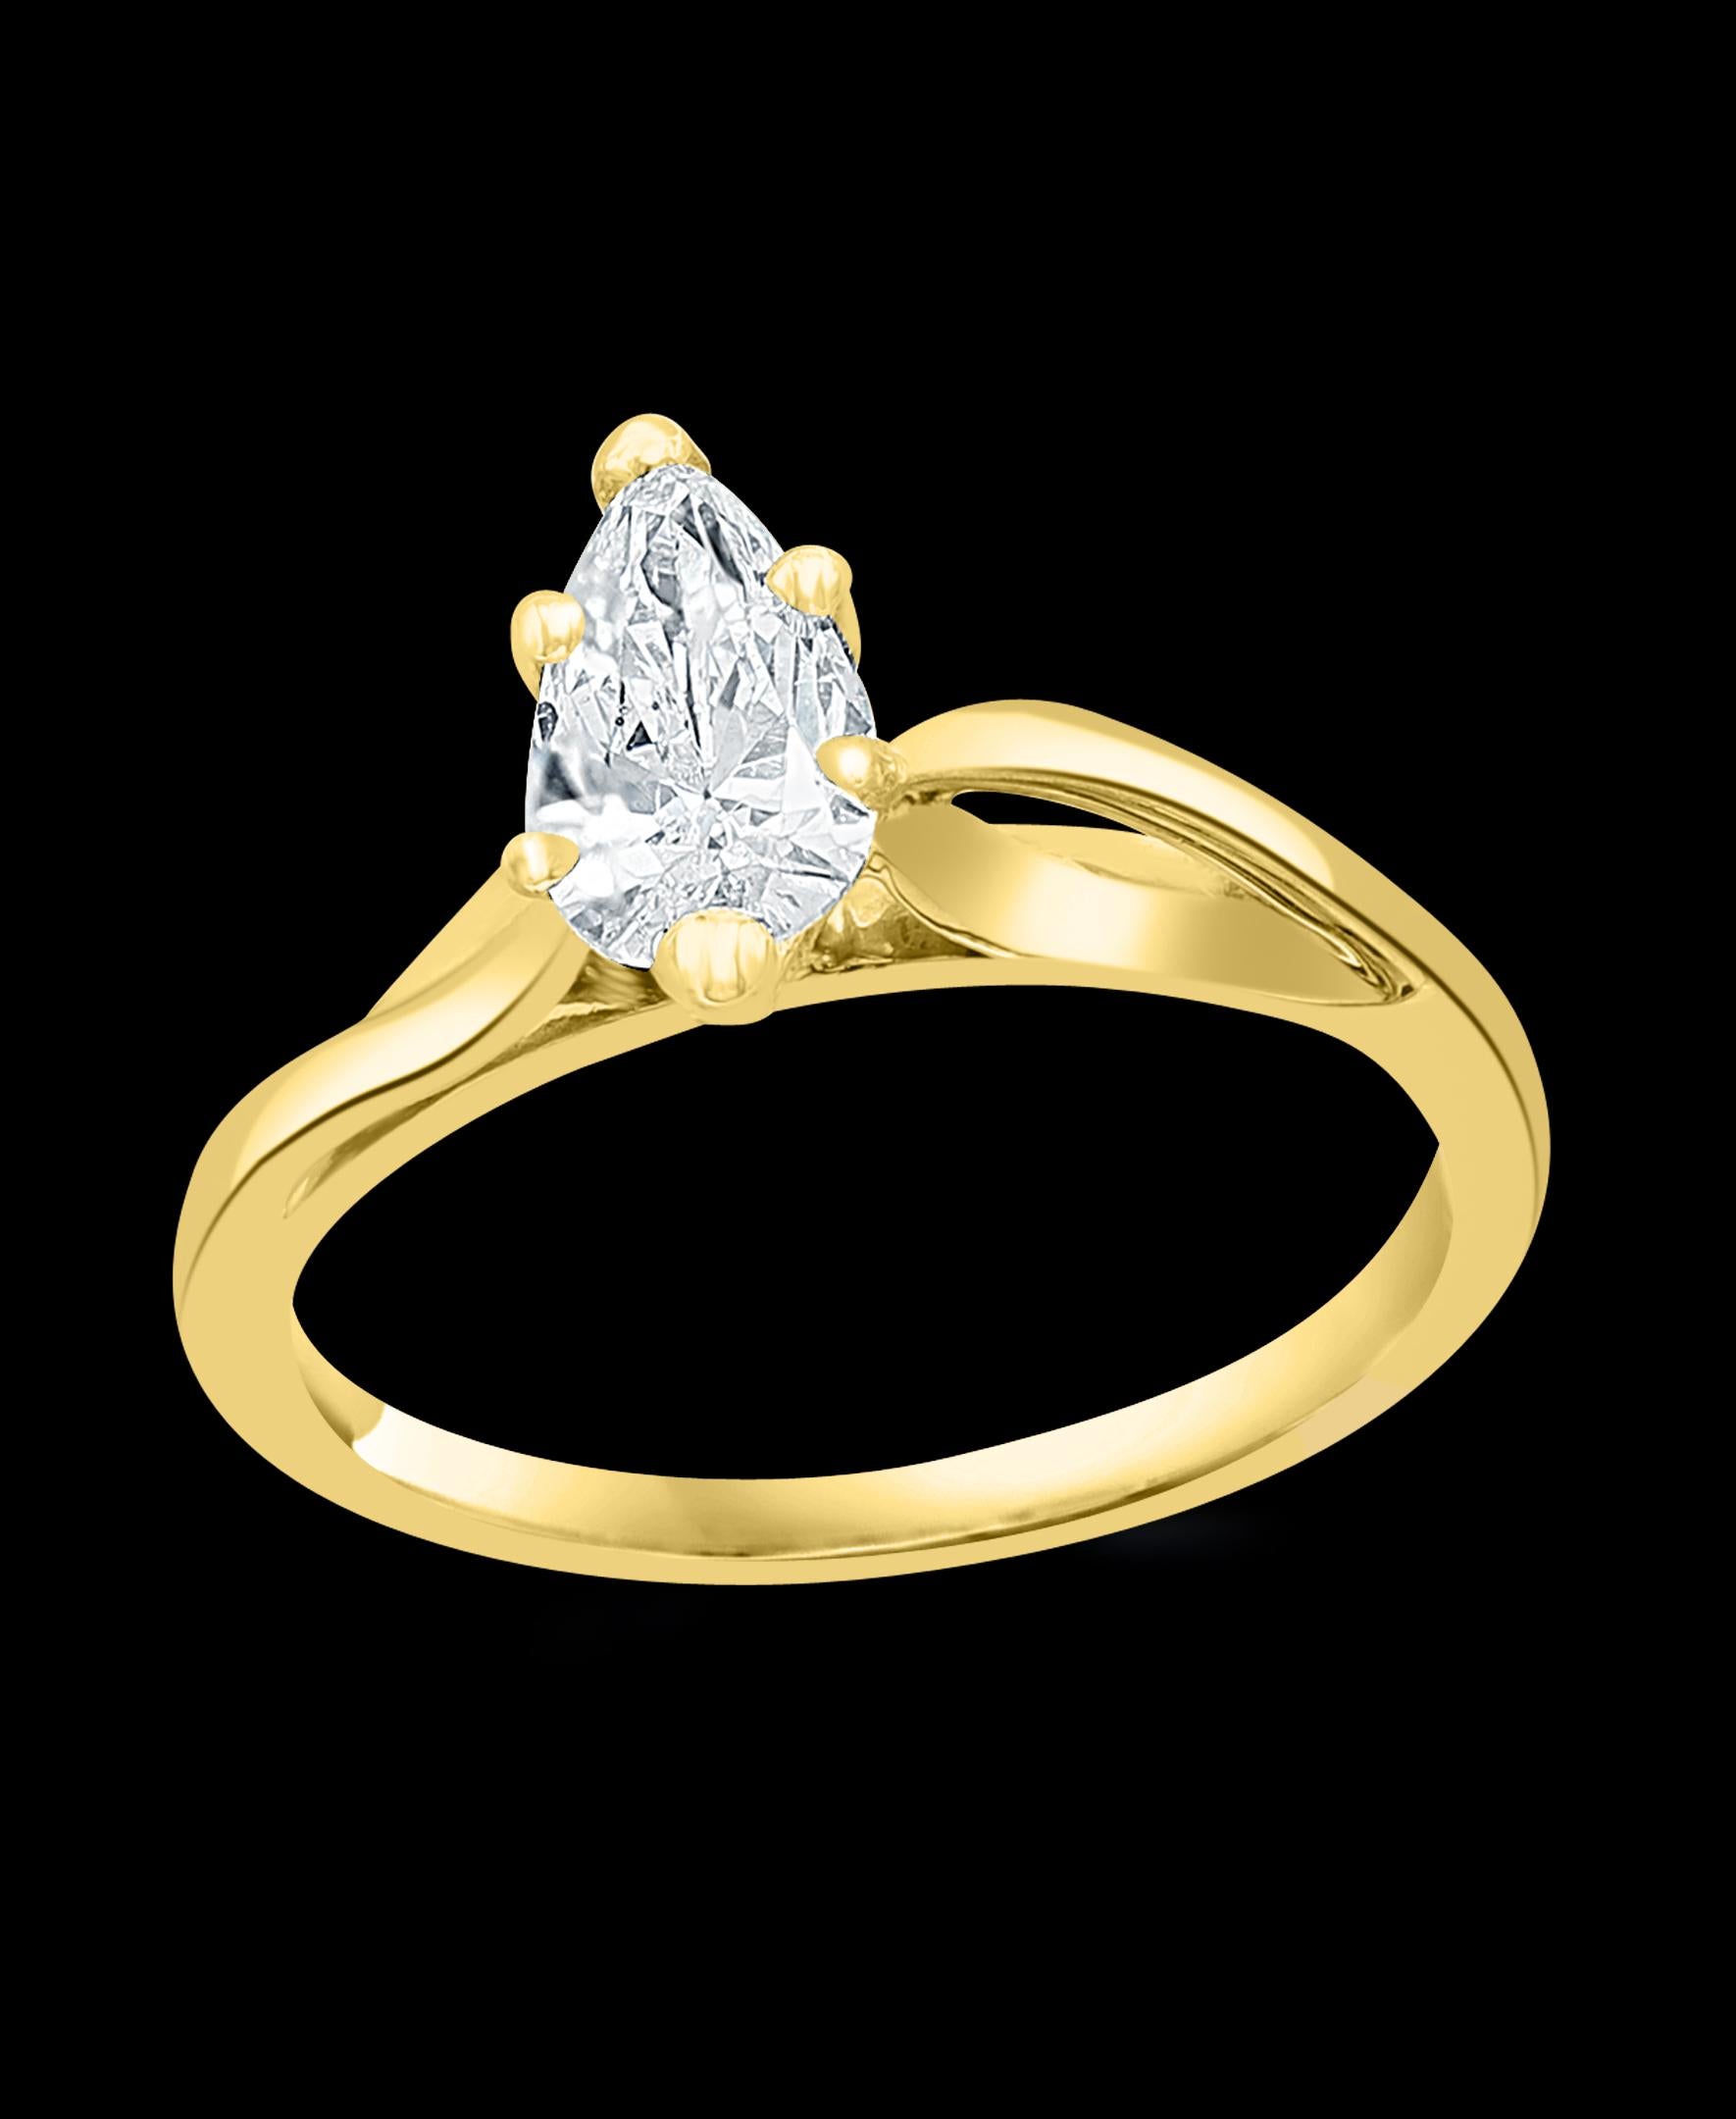 A sweet, shimmery style for any day of the week. This engagement ring has a very clean diamond 0.72 pointer
 Solitaire Pear cut diamonds. 
Set in 14 kt Yellow  gold. 2.2 gm
Best For Every day , home and work 
6 prong setting 
Ring size 5.5

Diamonds